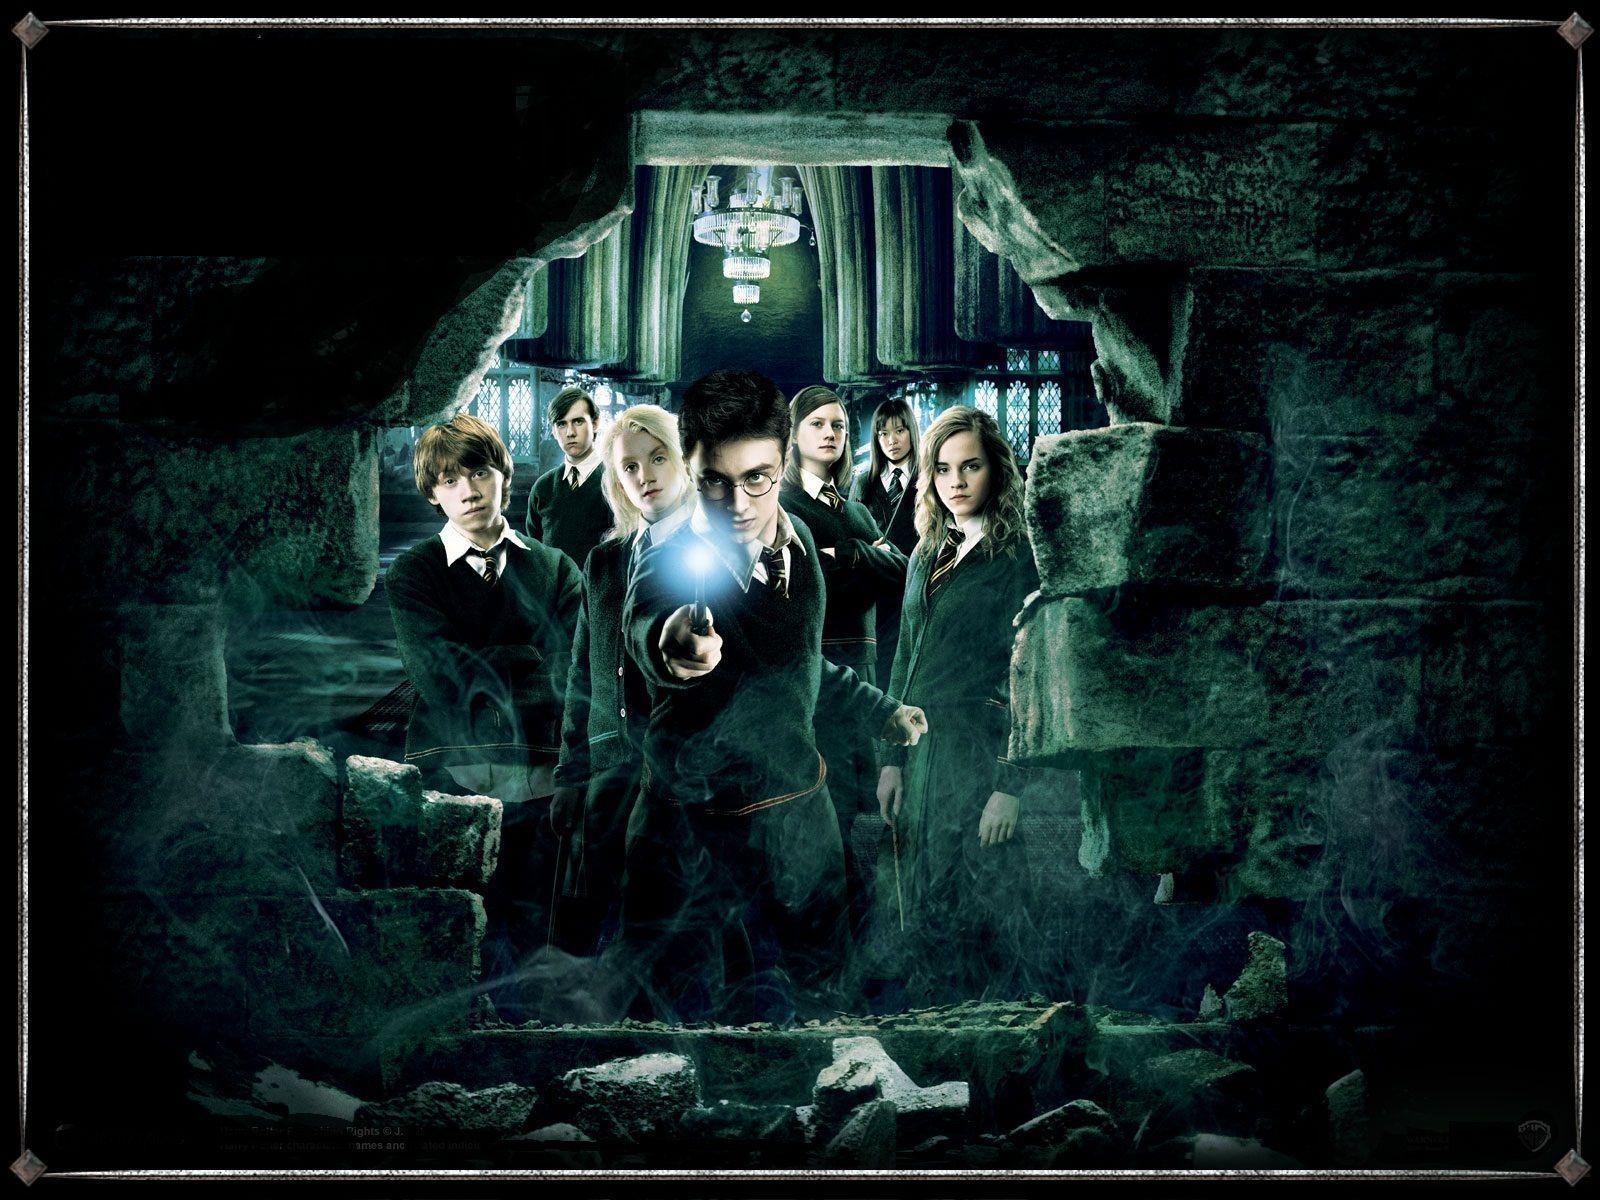 Harry, Ron and Hermione Wallpaper, Ron and Hermione